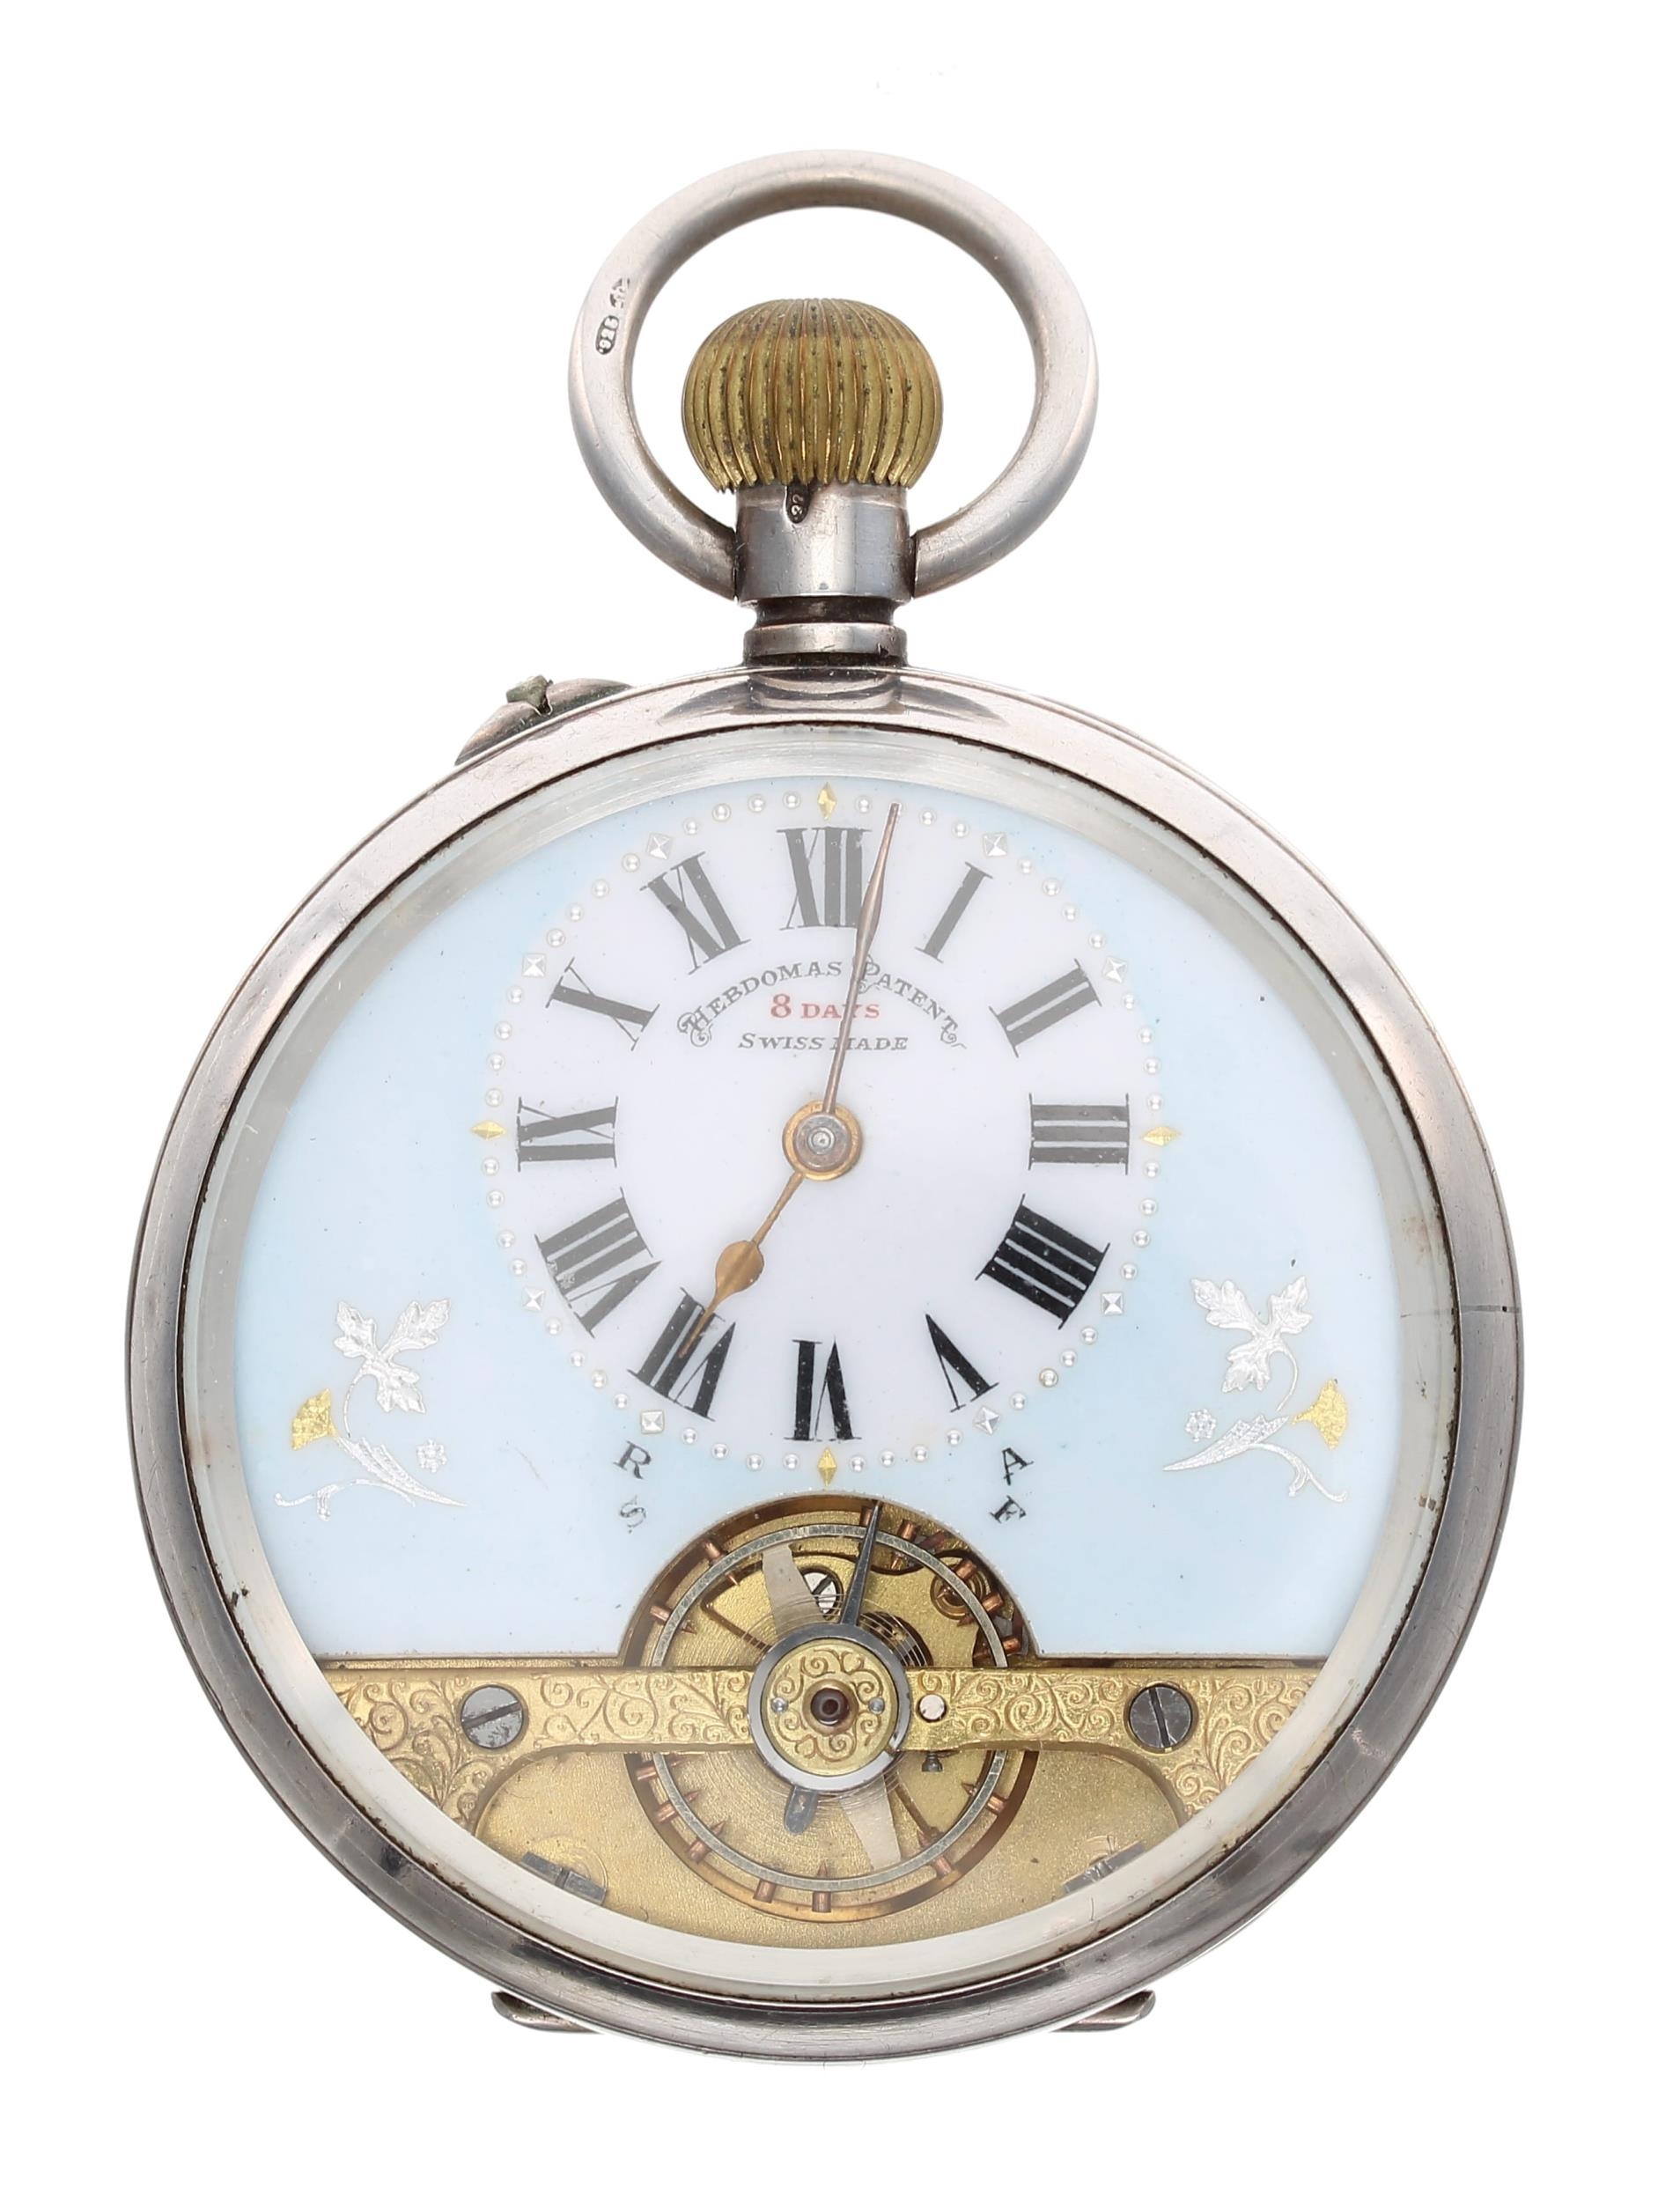 Hebdomas Patent 8 days silver pocket watch, import hallmarks London 1912, the decorated dial with - Image 2 of 4